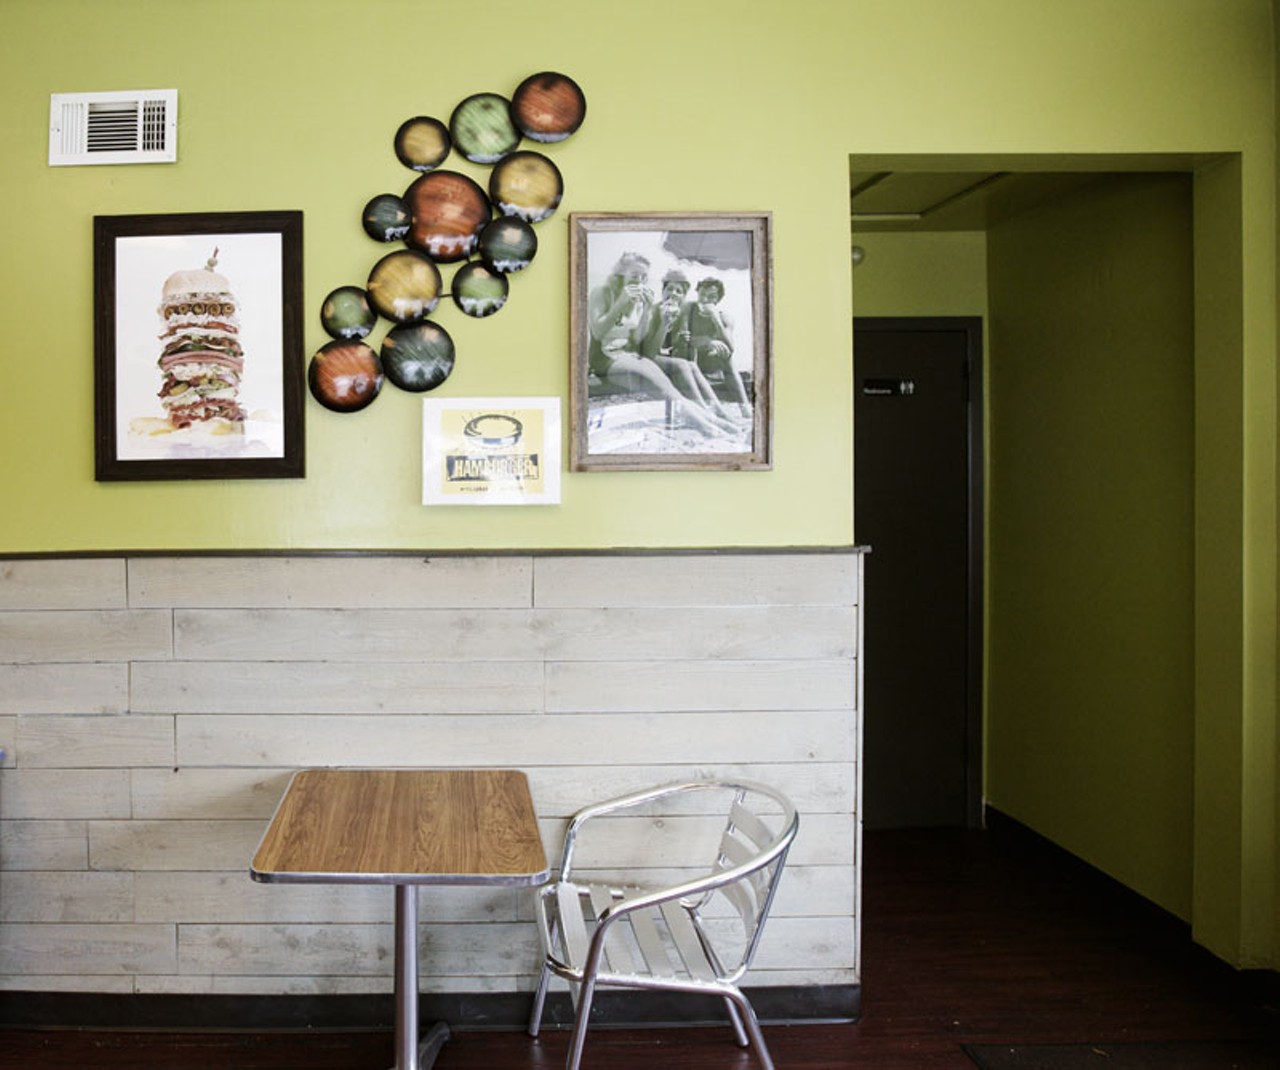 The lime green, cedar walls and whimsical decor add a great deal of charm to this small space.